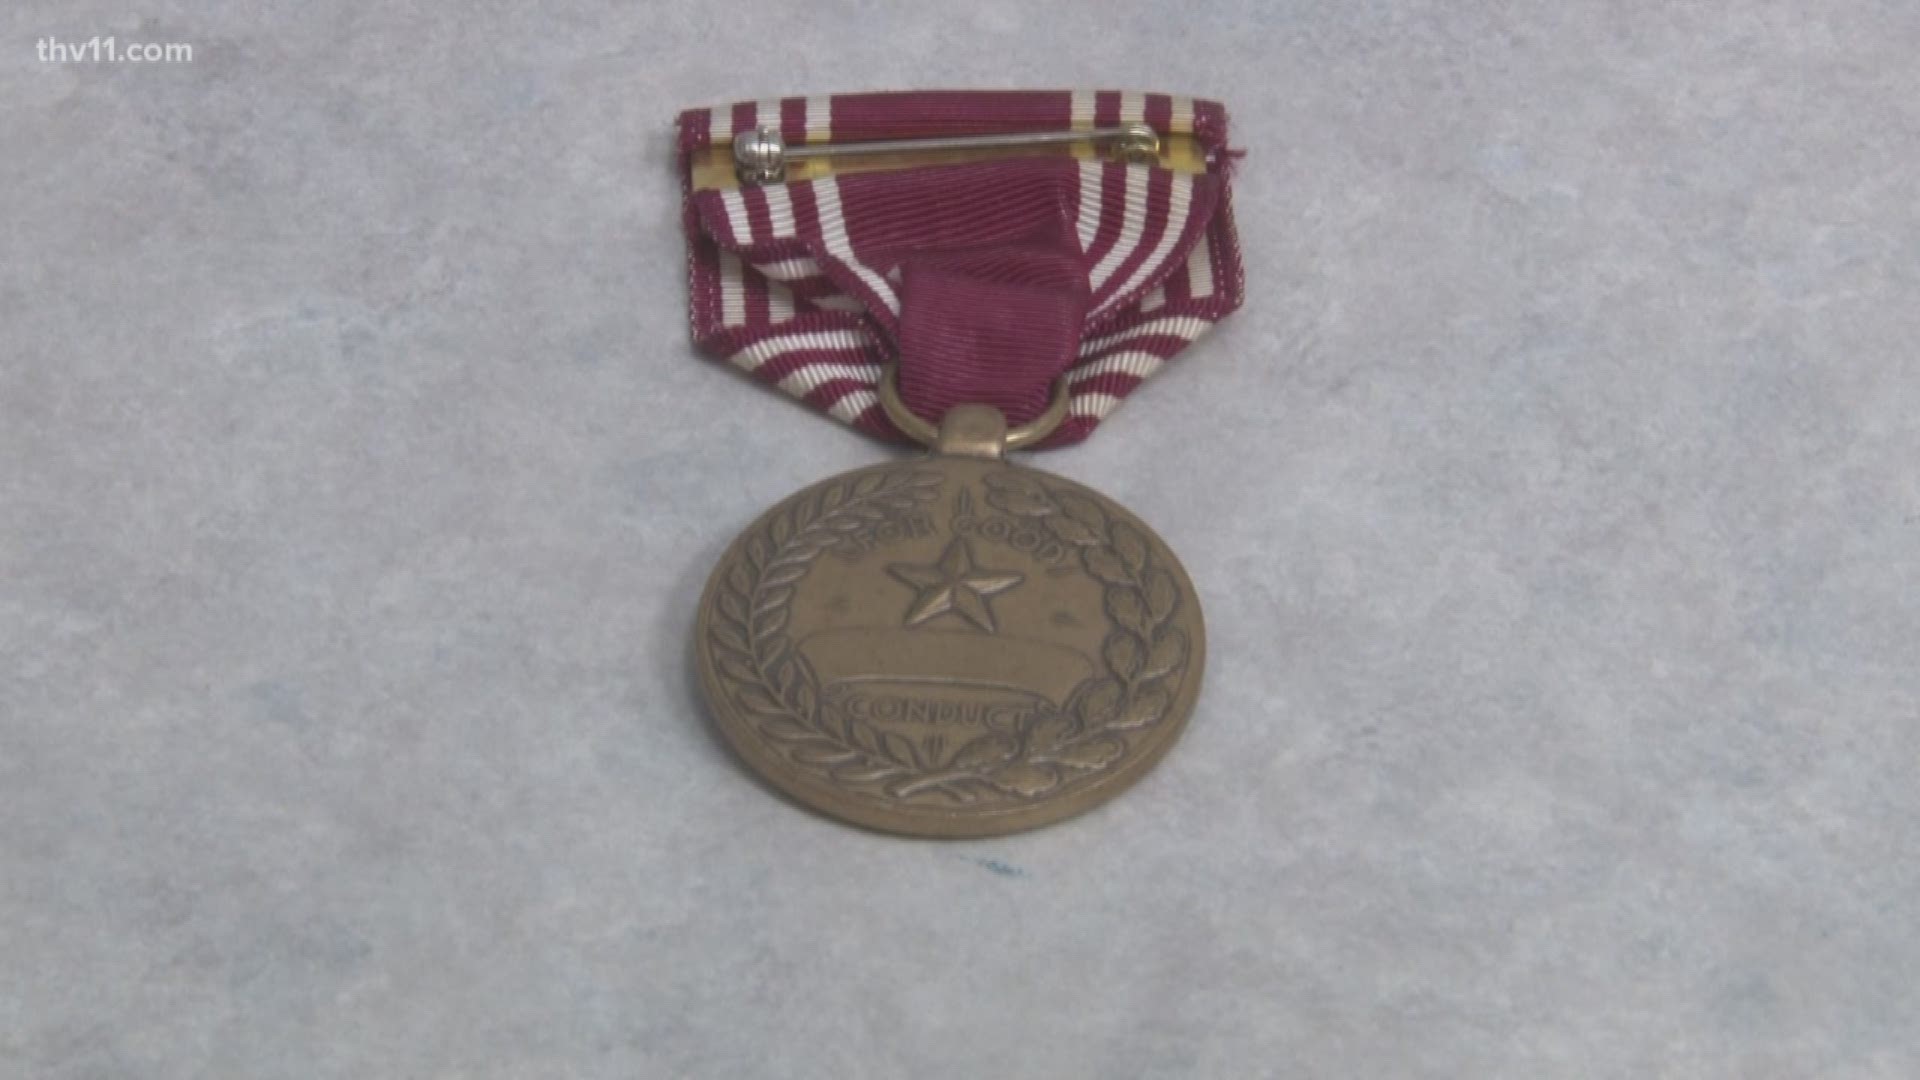 These medals, coins, and dog tags belonged to William Kennedy. The staff at Goodwill doesn't know who he is, where he's from, or how these ended up at their store. So they want everyone's help finding their rightful owner.